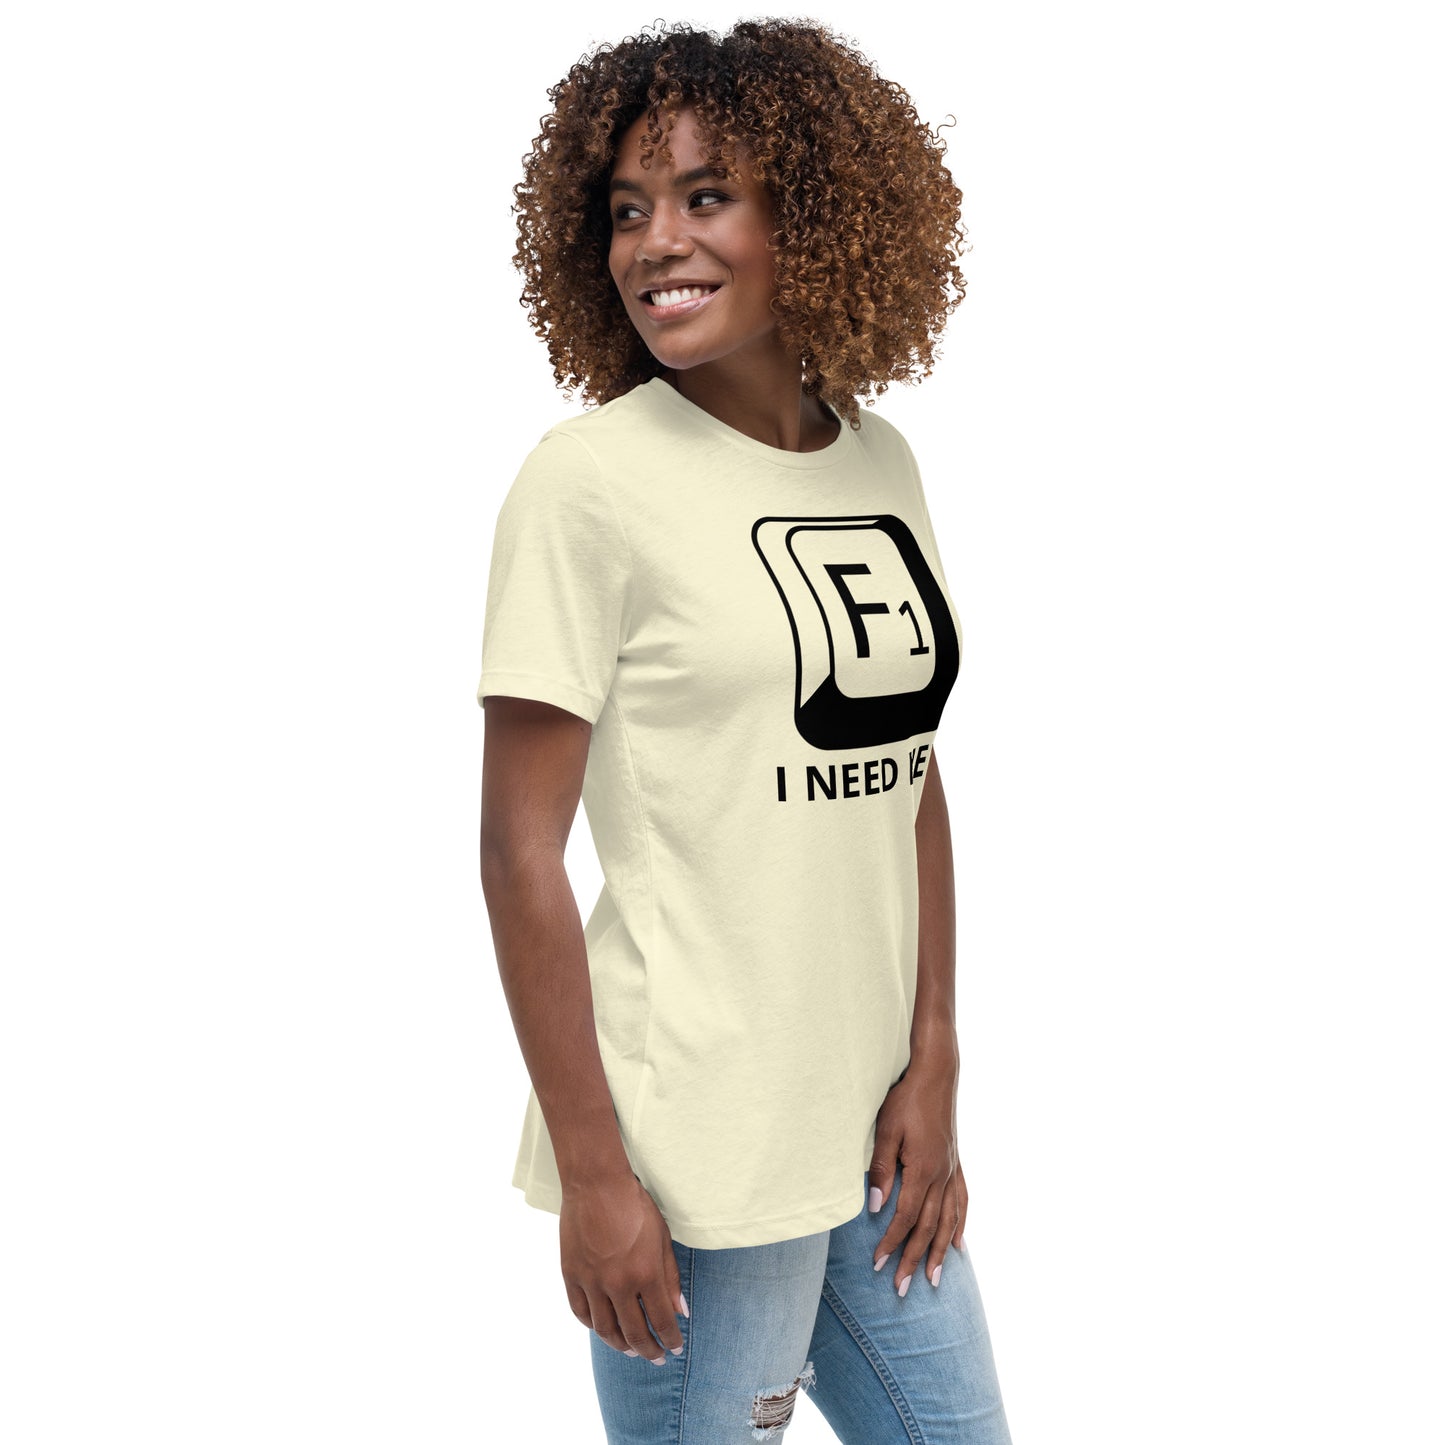 Woman with citron t-shirt with picture of "F1" key and text "I need help"